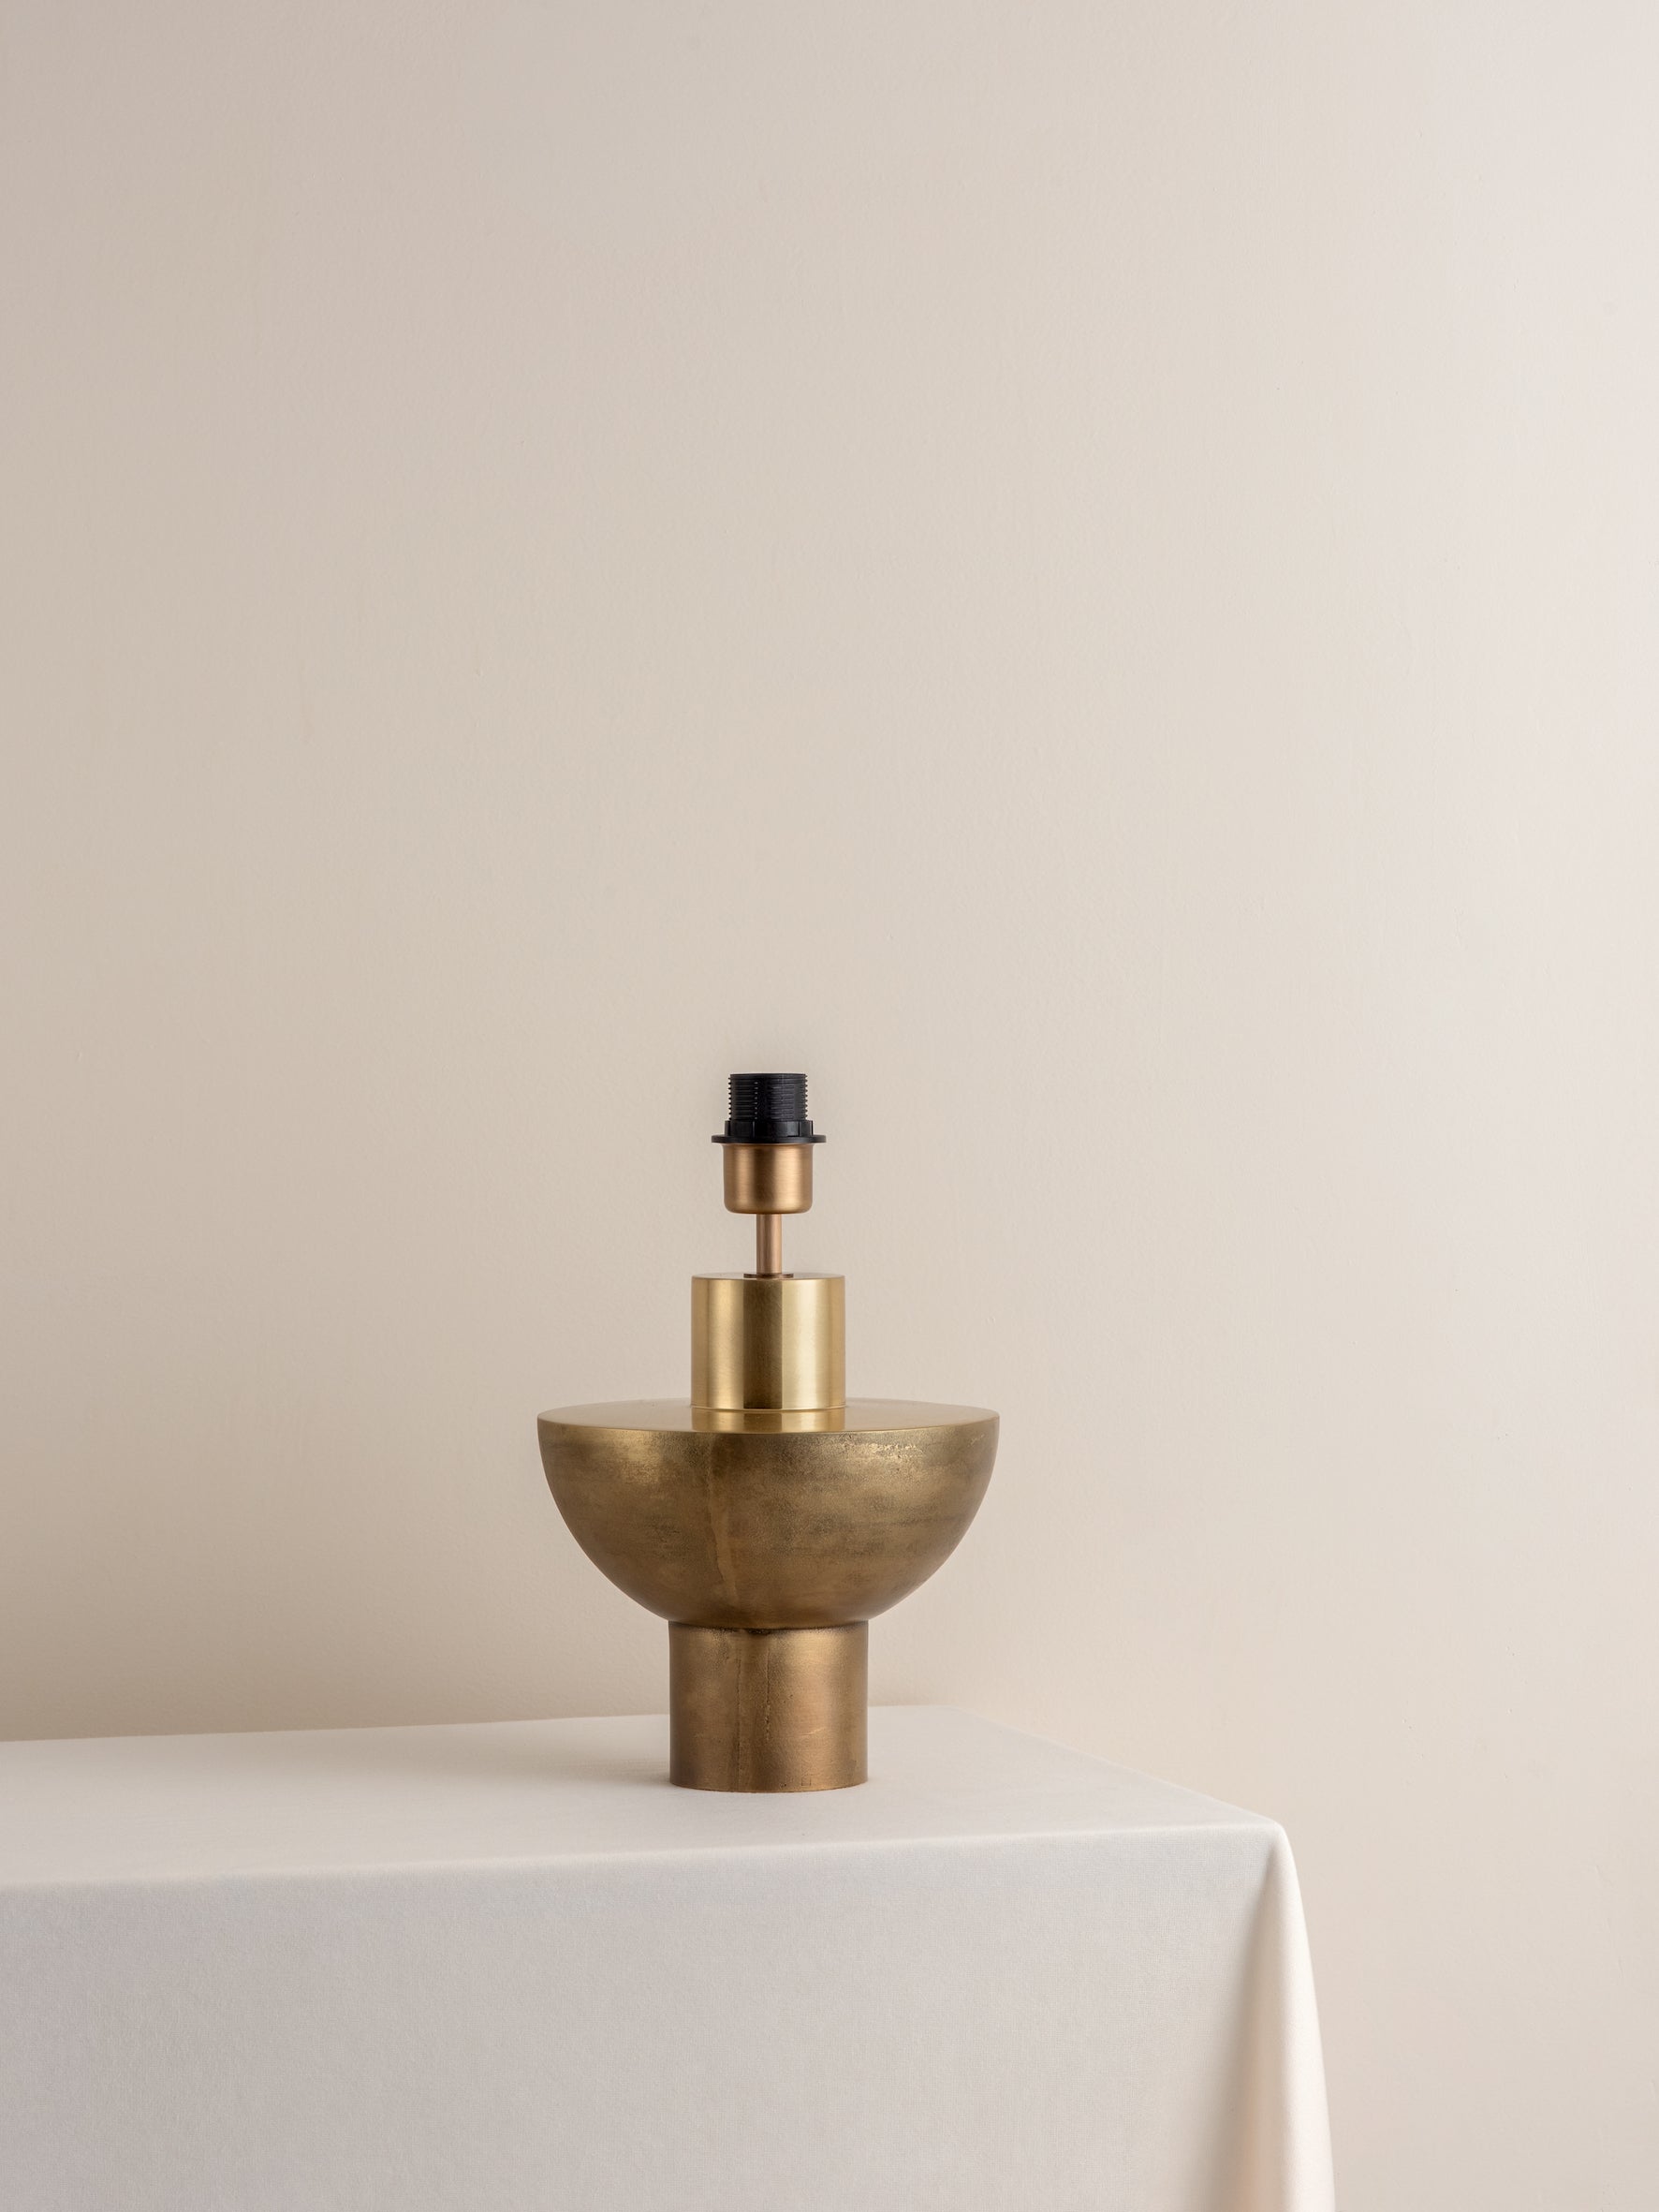 Editions brass lamp with + walnut wood shade | Table Lamp | Lights & Lamps Inc | Modern Affordable Designer Lighting | USA